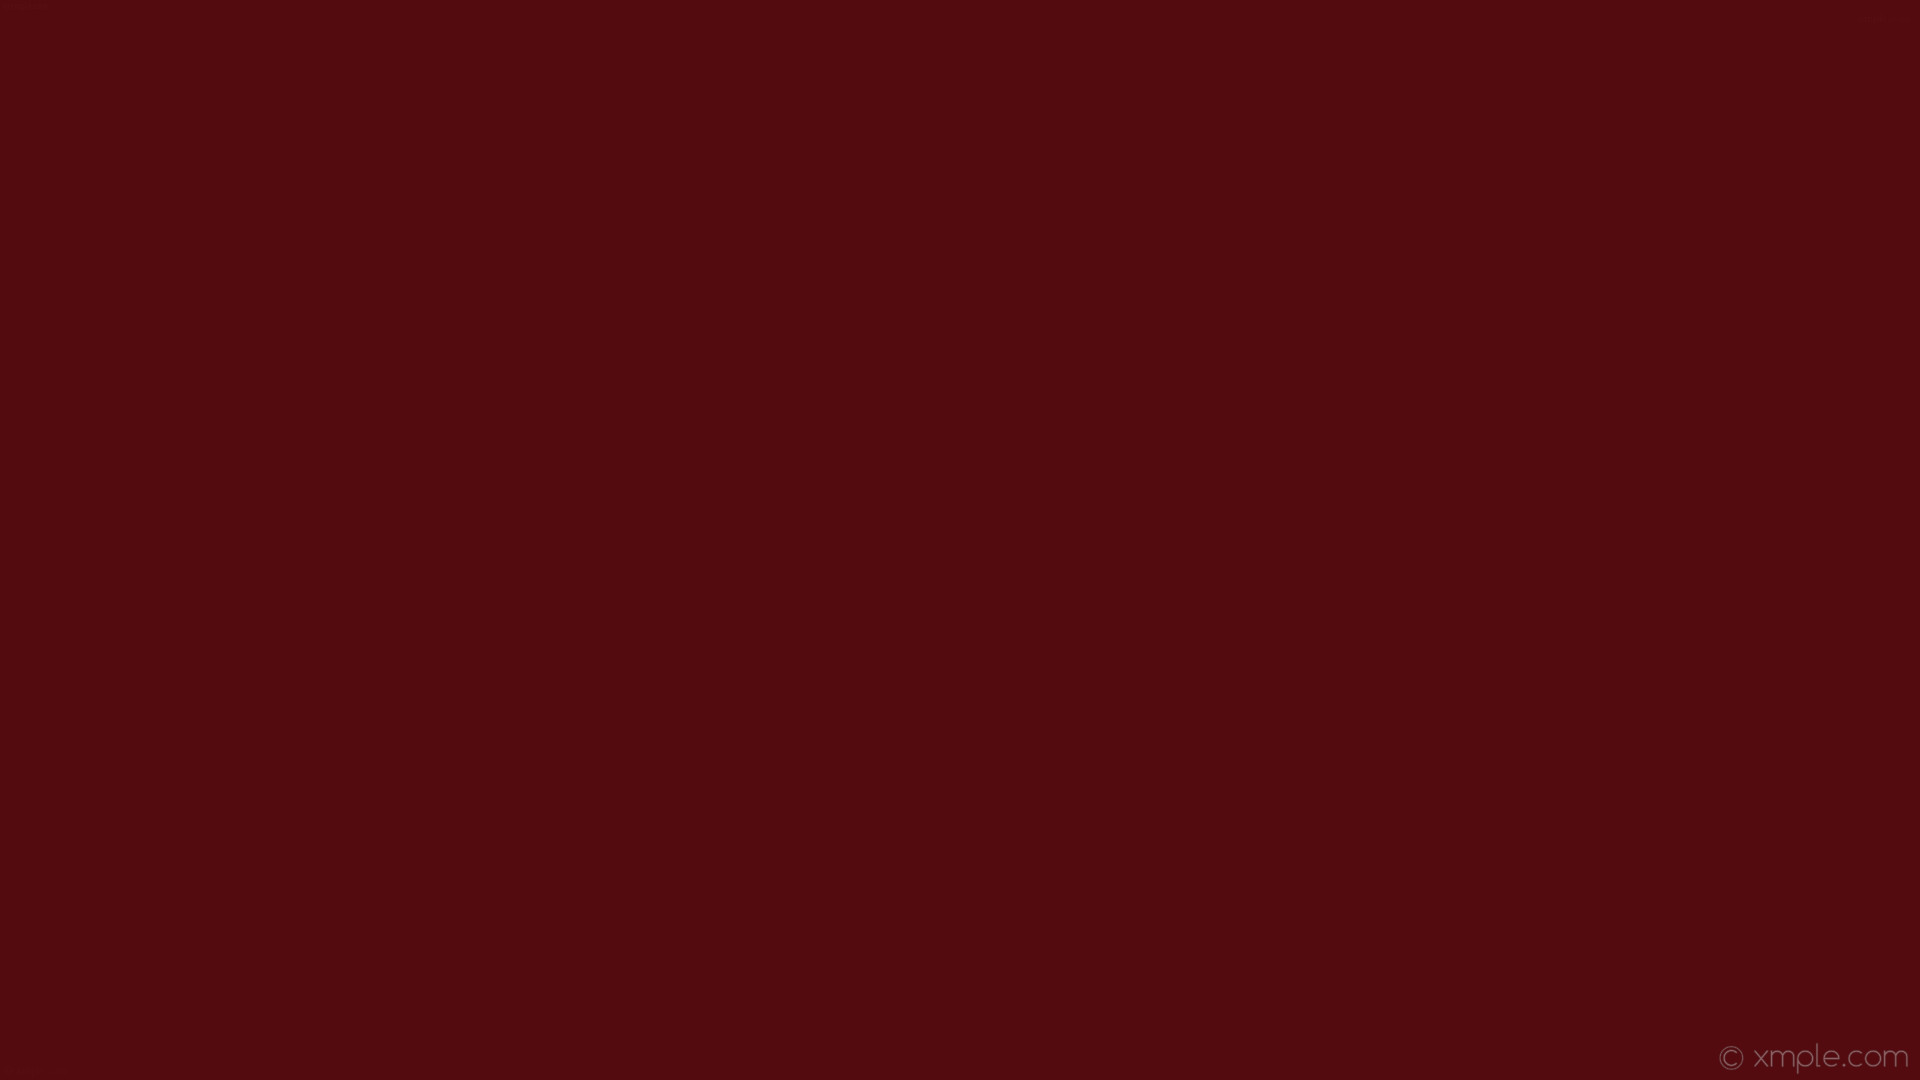 1920x1080 wallpaper single red solid color plain one colour dark red #530b0f